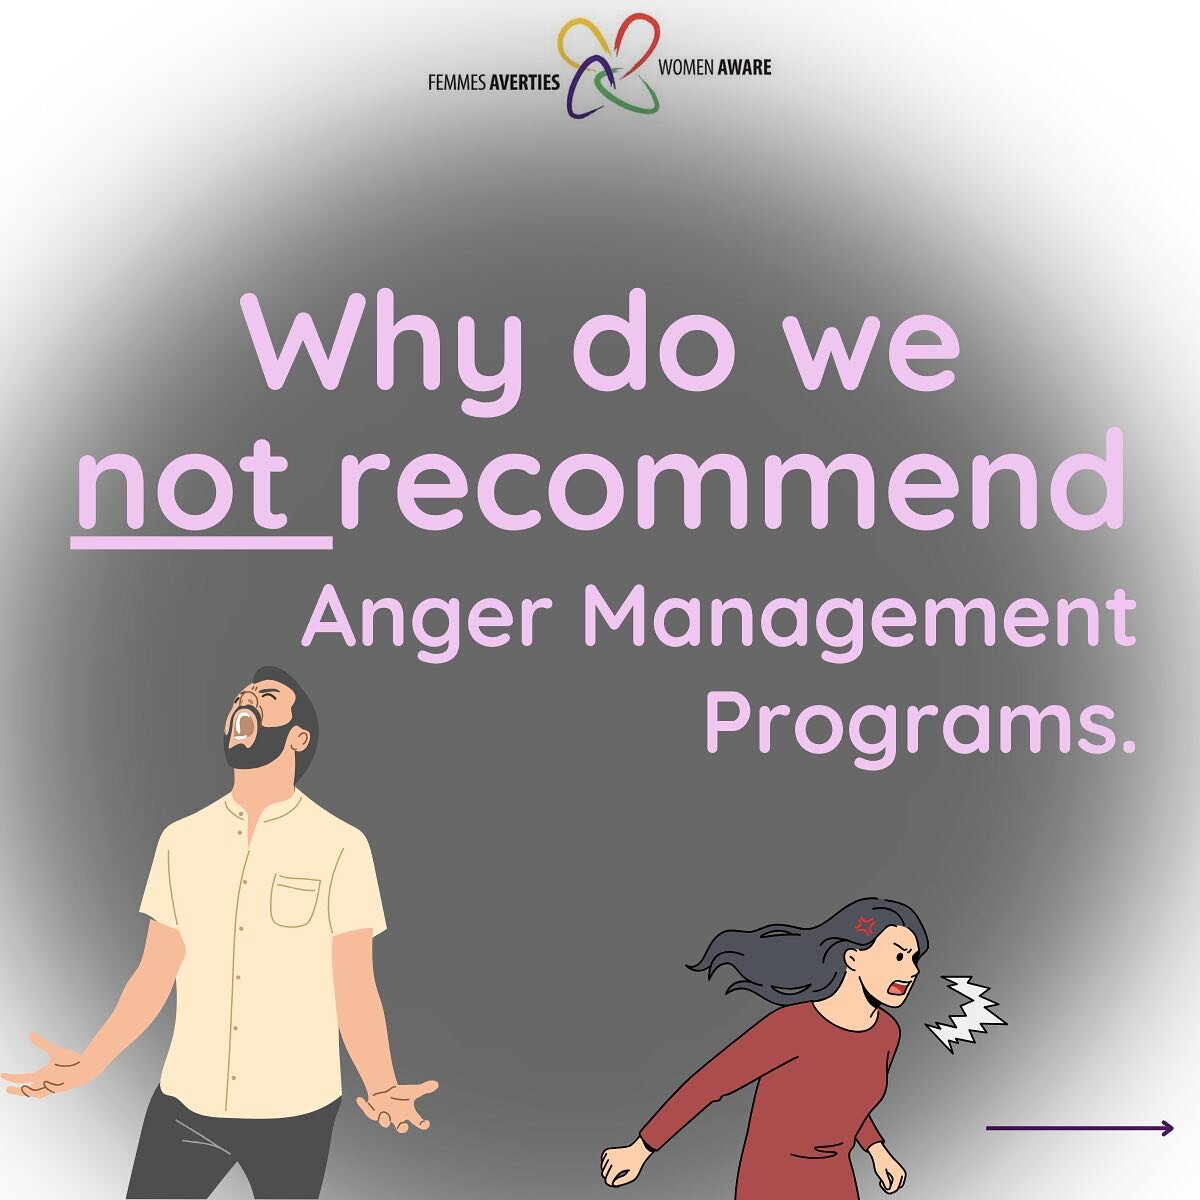 Intimate Partner Violence is an issue of control over the other. Anger is a valid emotion used as a tool of violence against the other or as an excuse to justify anger and blame the other. Anger management programs are not solutions for reducing dome